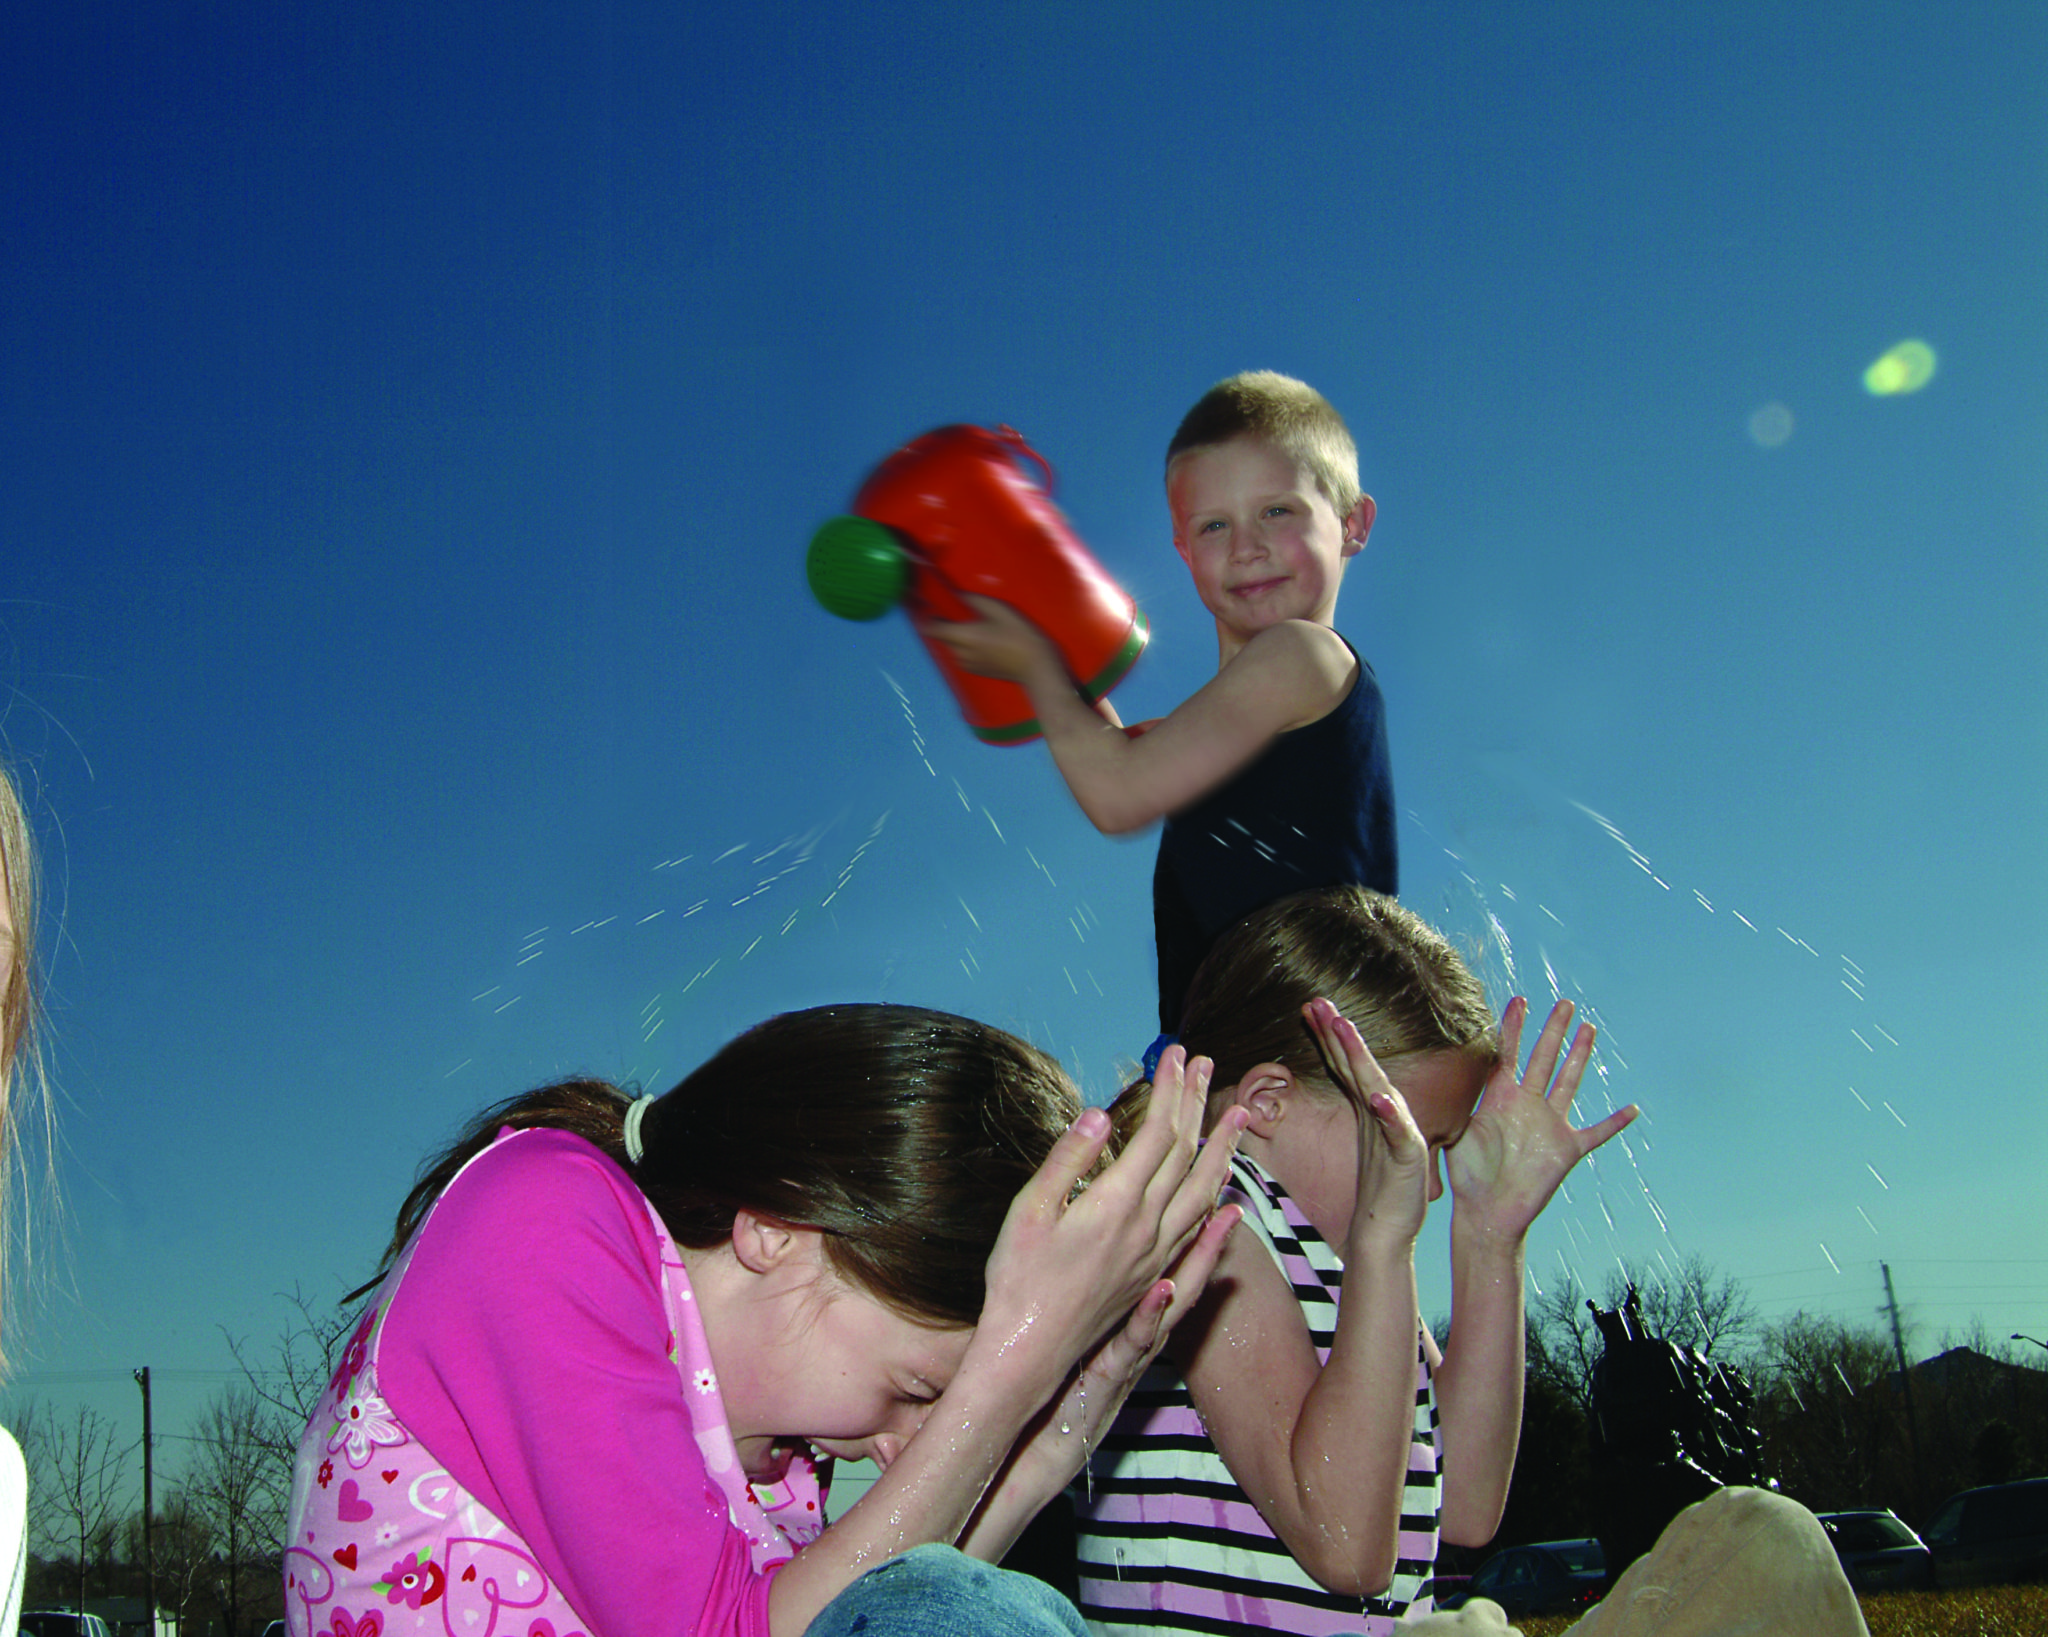 A boy sprinkles water out of a watering can on his friends.